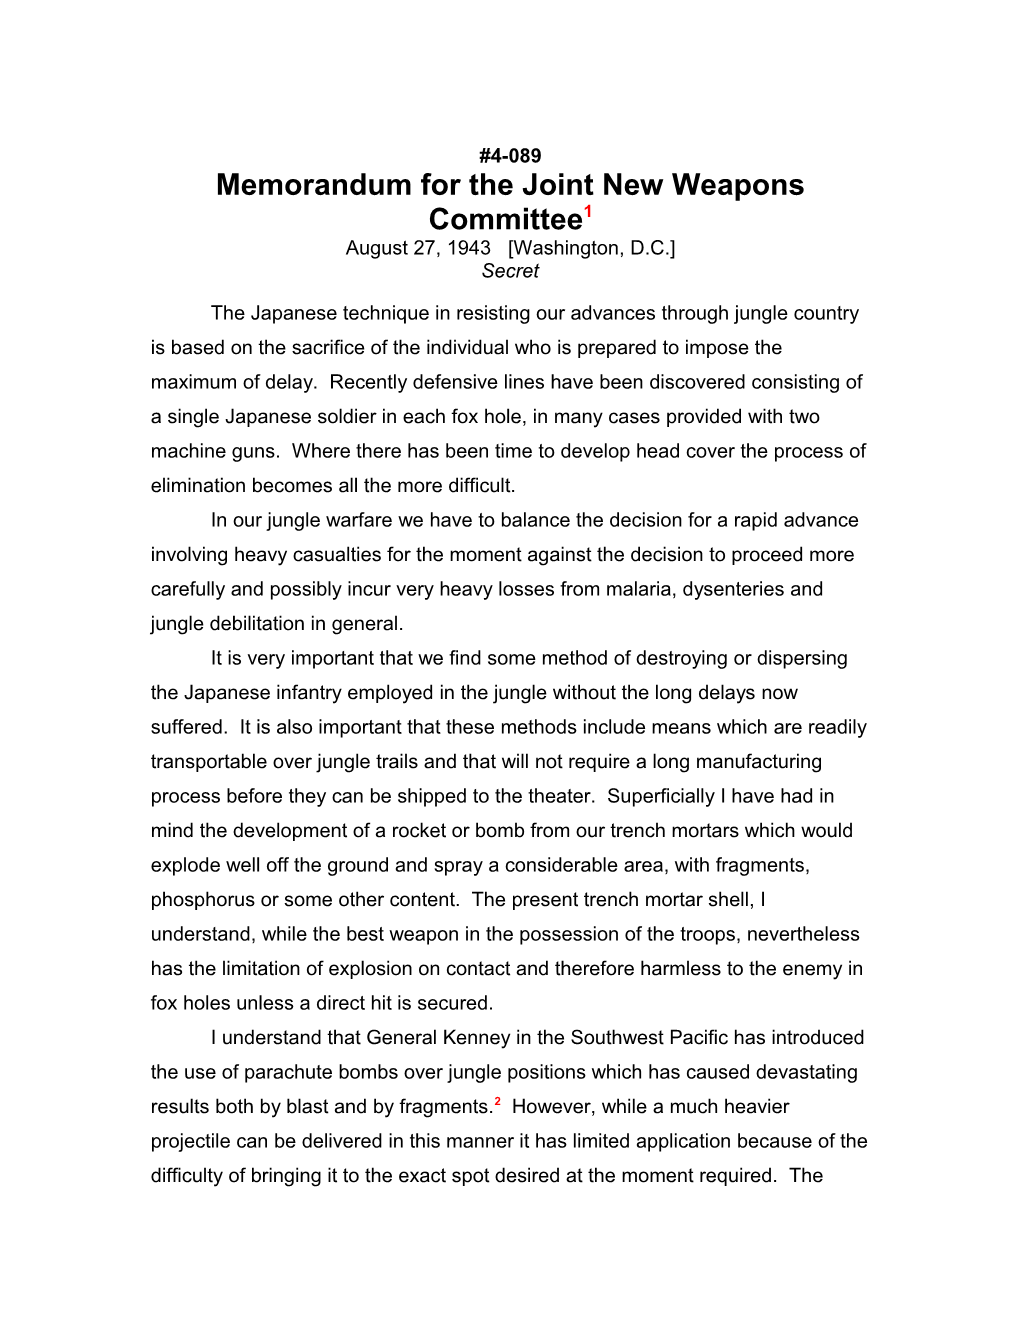 Memorandum for the Joint New Weapons Committee1